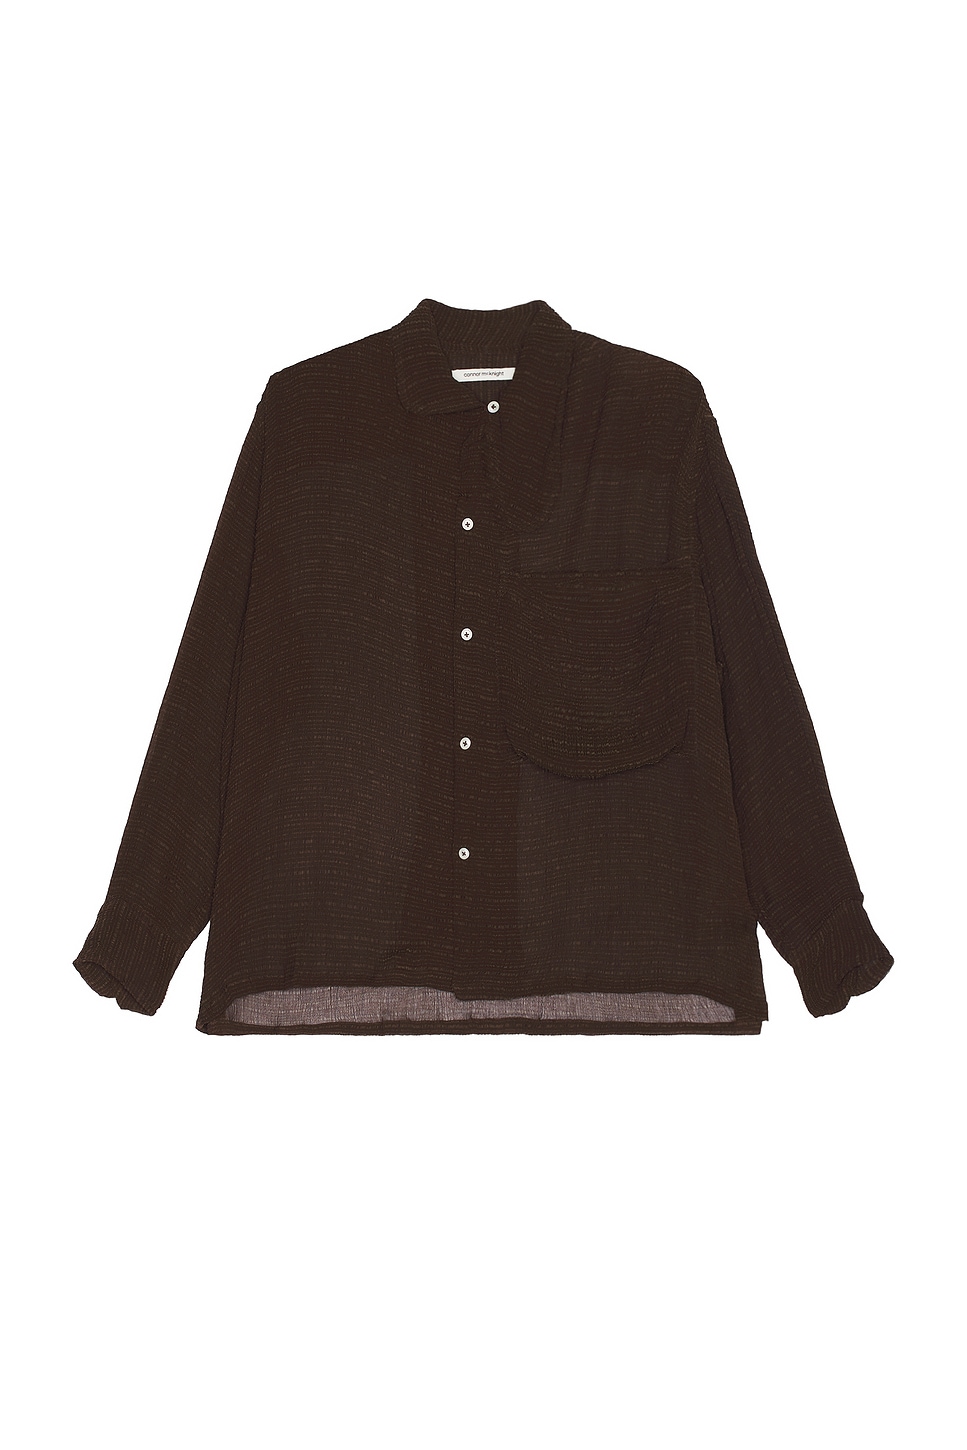 Image 1 of Connor McKnight Crinkle Long Sleeve Big Pocket Shirt in Brown